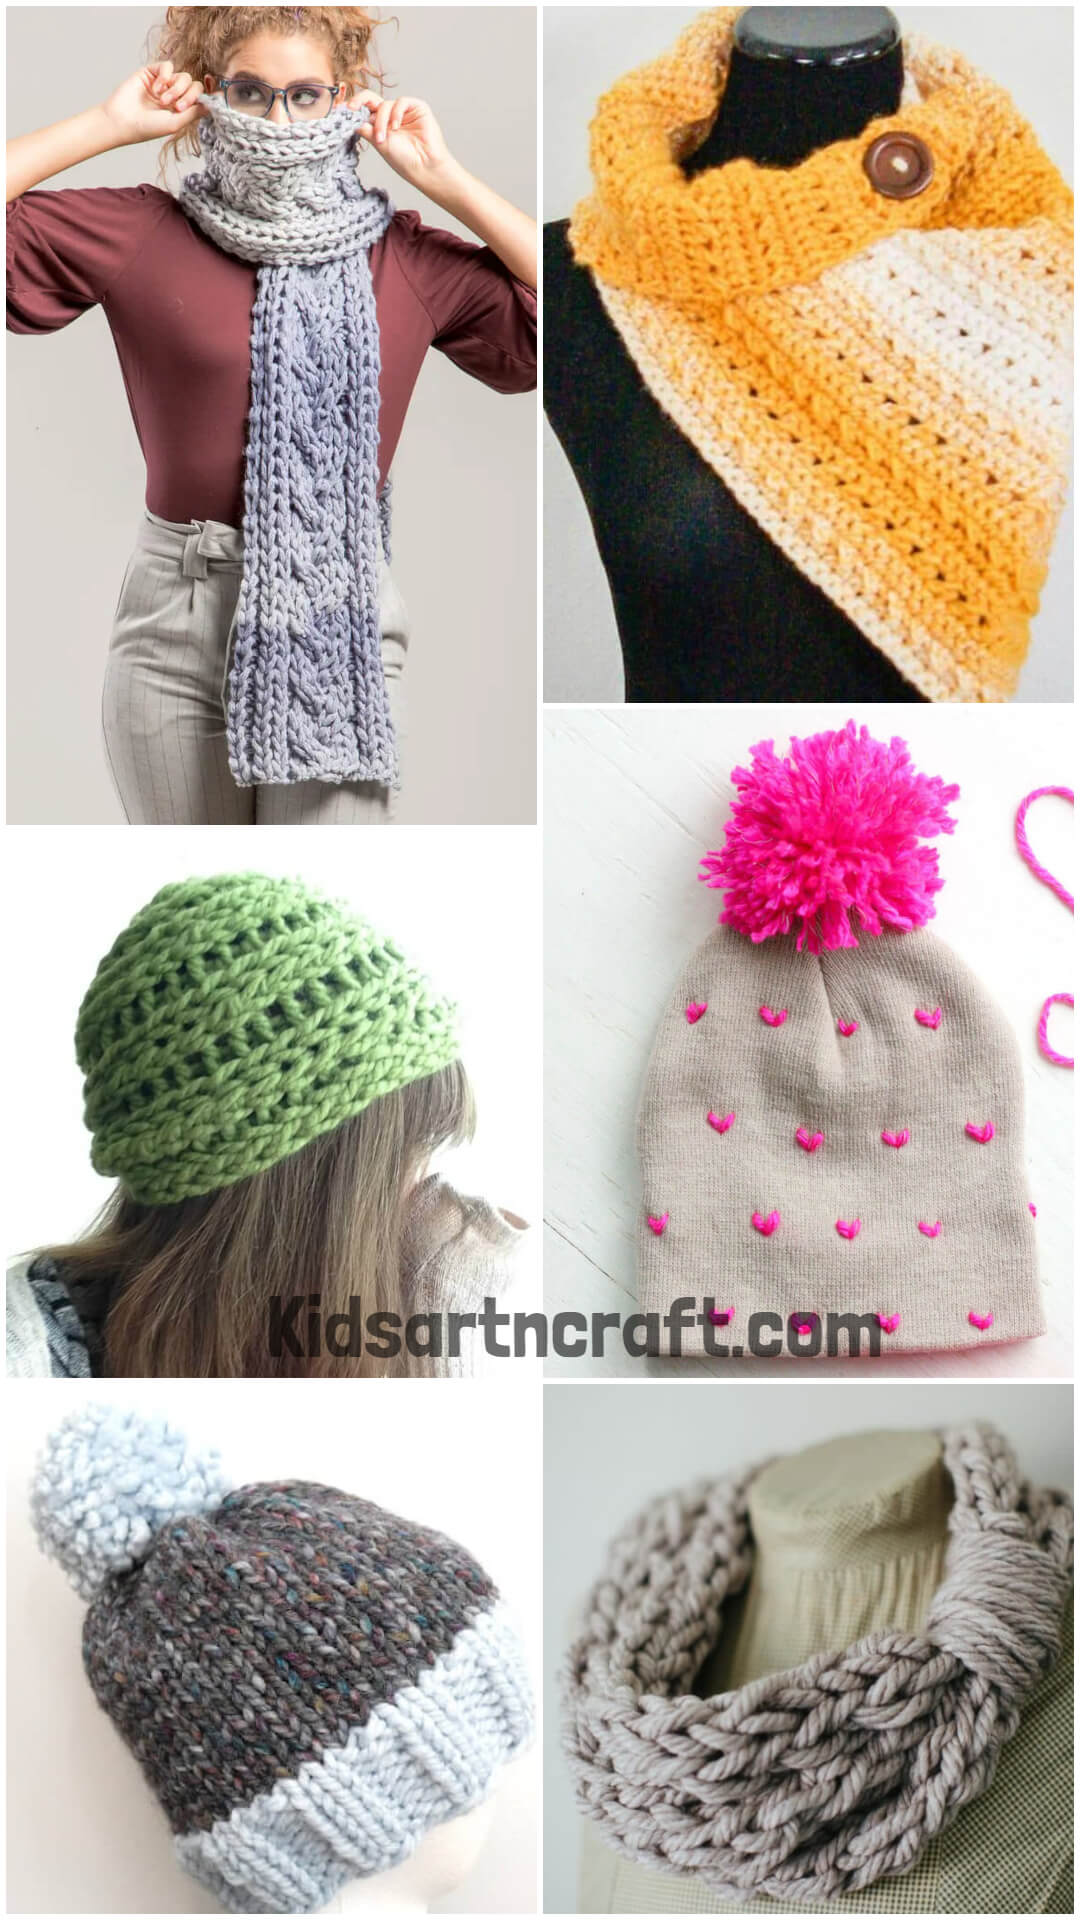 DIY Yarn Projects for this Winter 